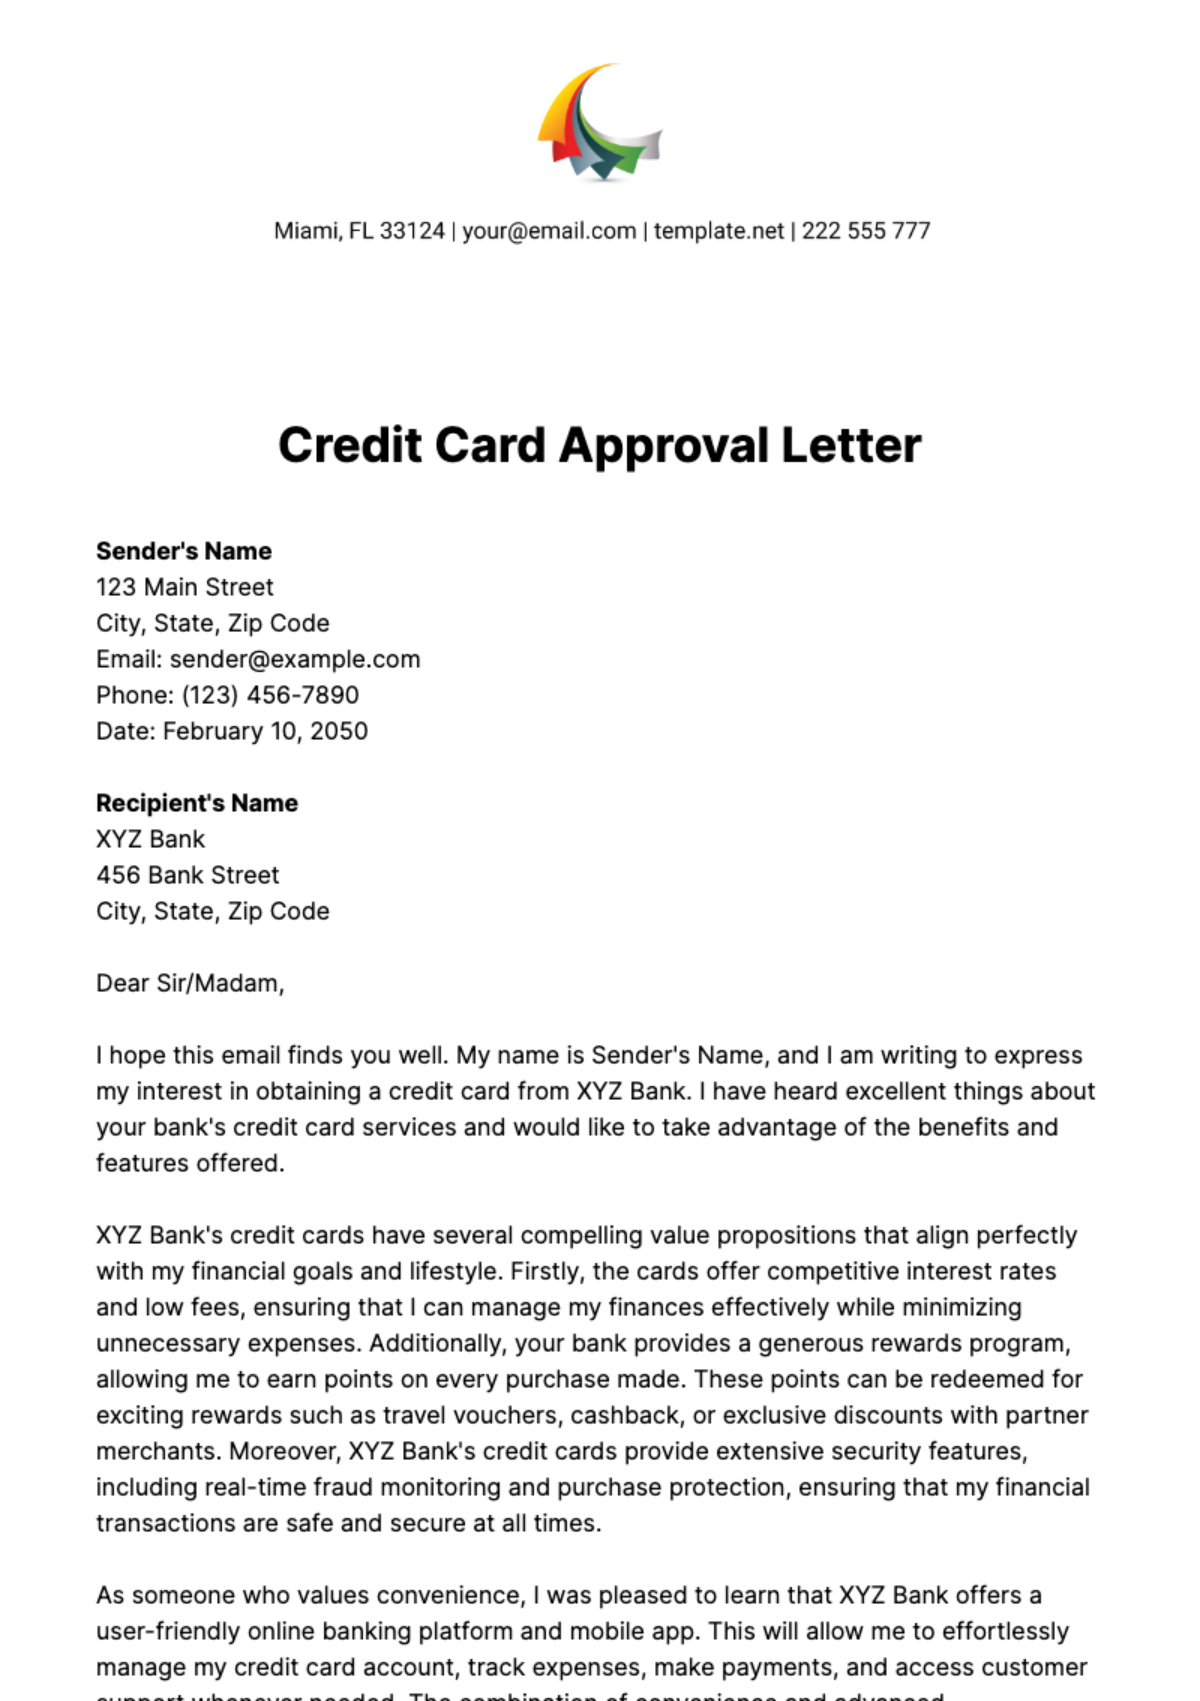 Free Credit Card Approval Letter  Template